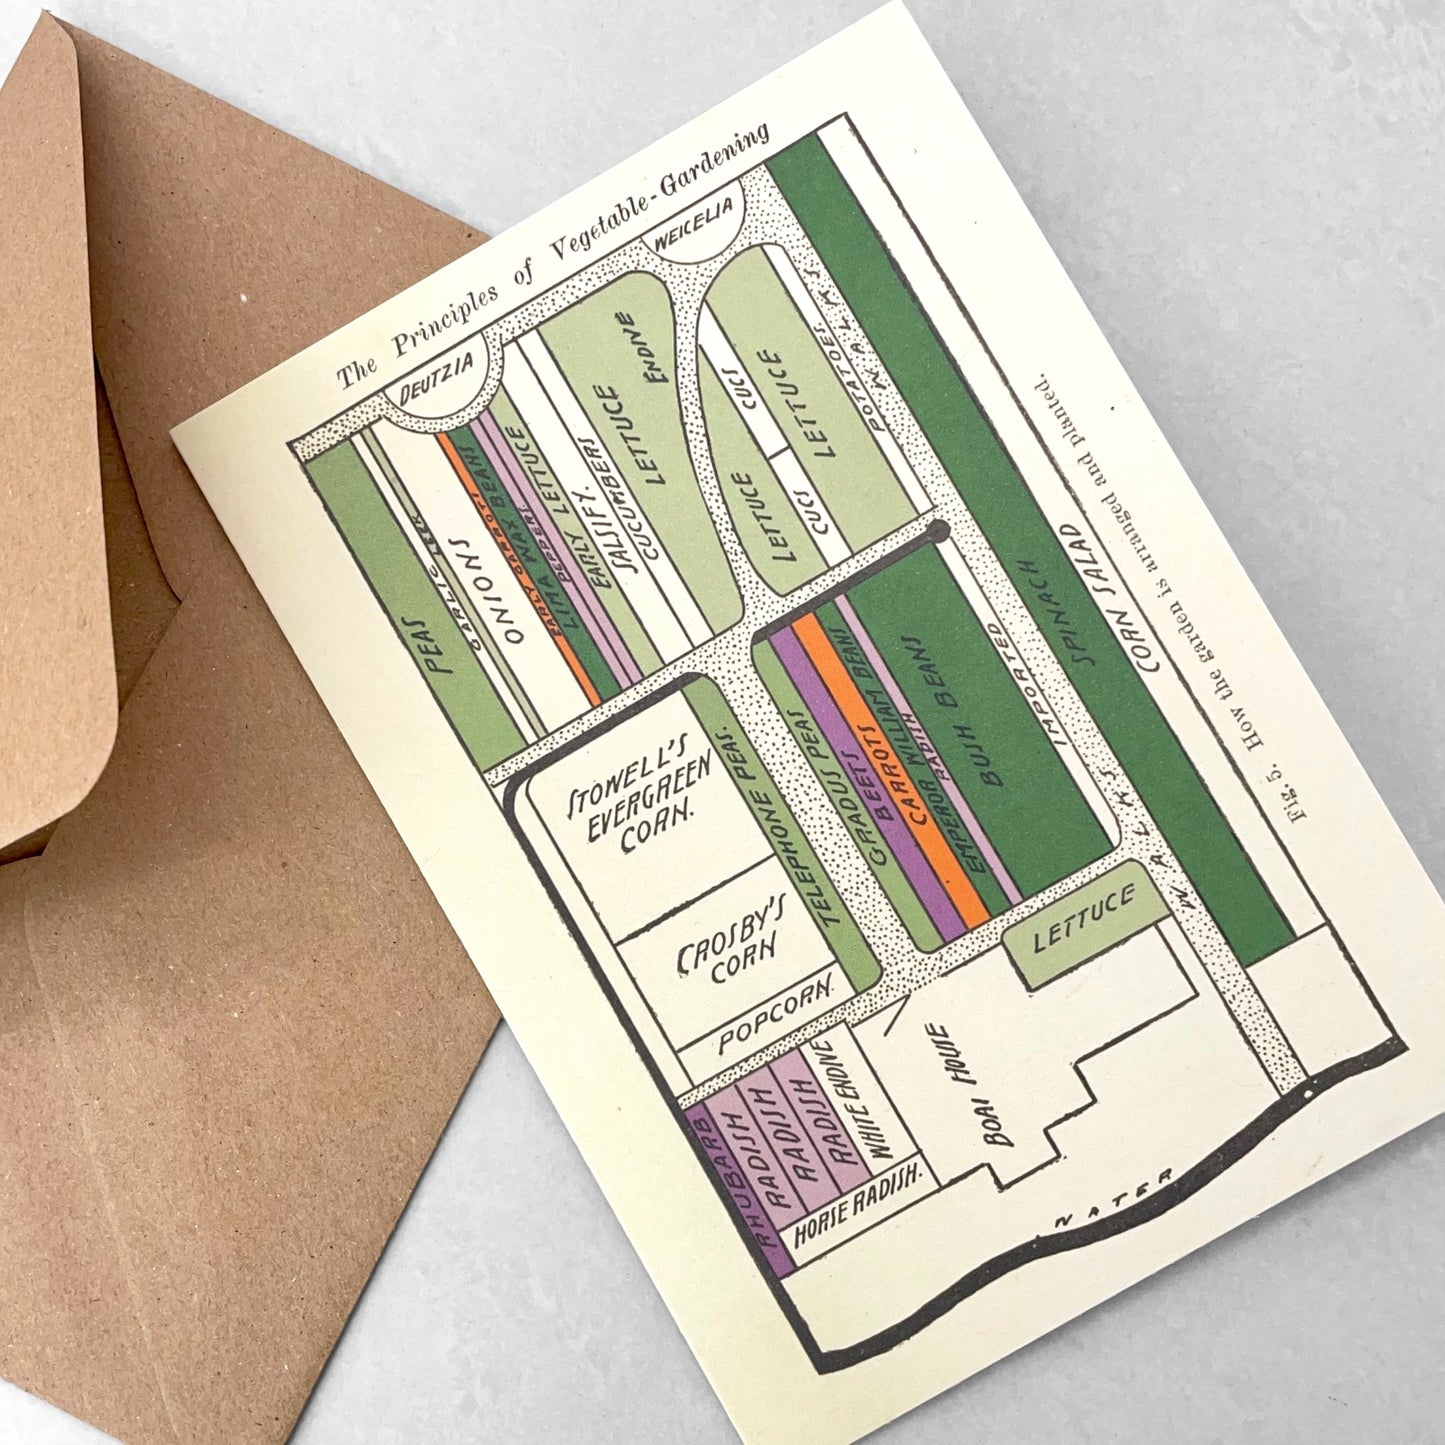 A greetings card with a drawing of the layout of where to plant vegetables in an urban garden/allotment. By The Pattern Book.  Pictured with envelope